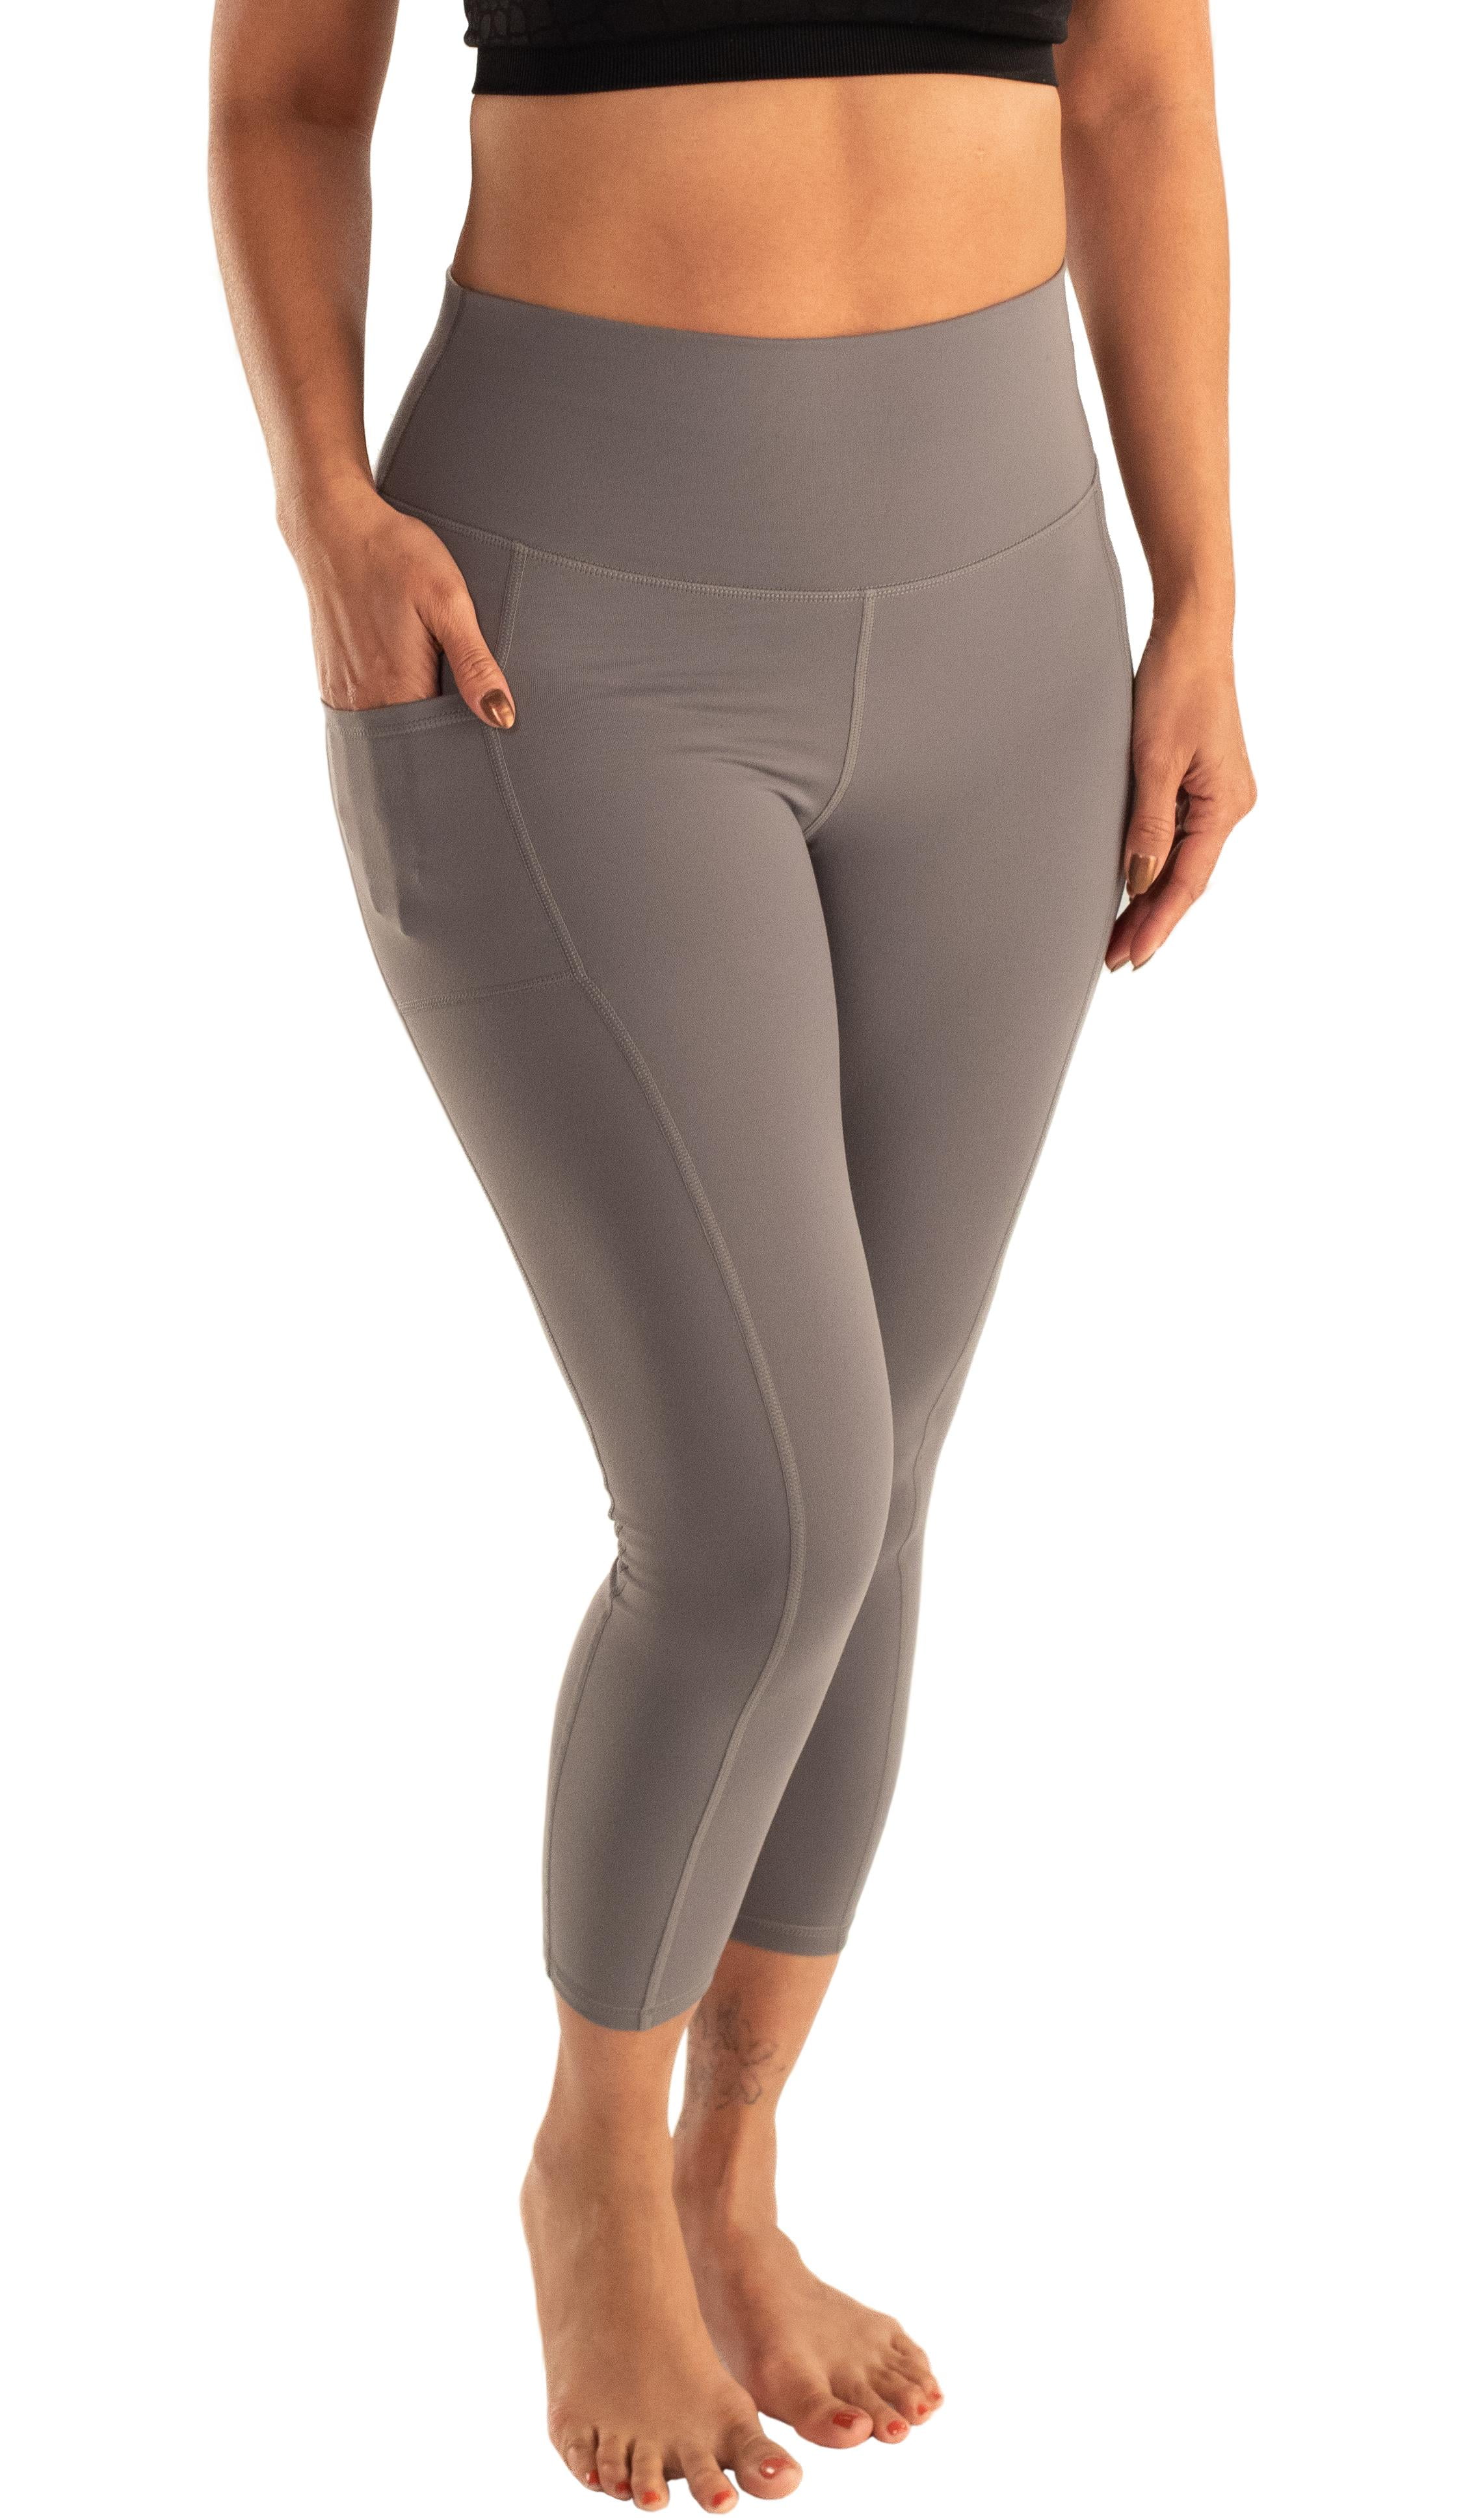 Leakproof Womens Leggings: Leggings with Pockets Designed with Built-in  Bladder Leakage Pads for Women (25 Inseam)